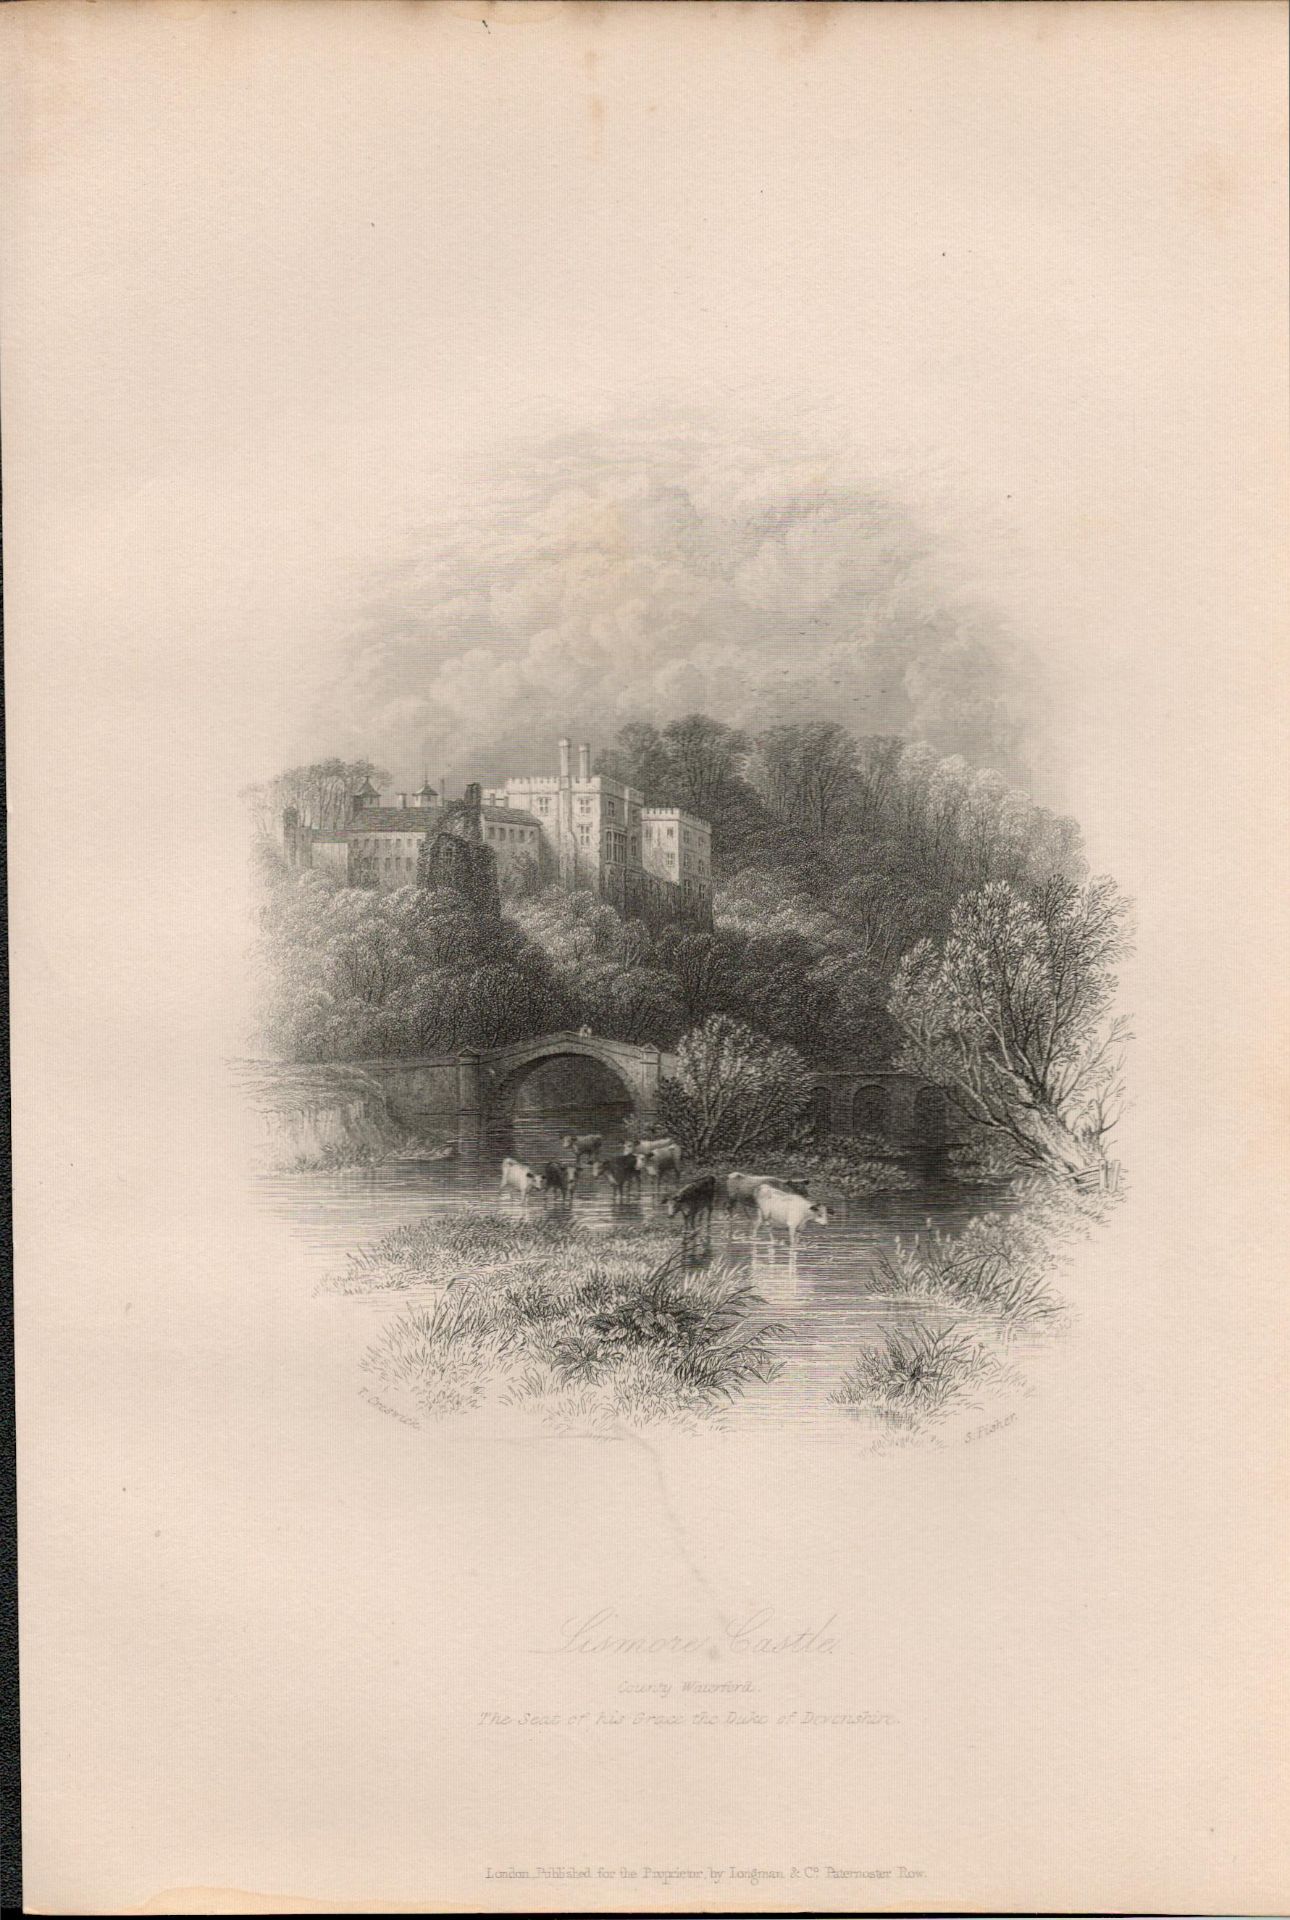 Lismore Castle Waterford 1837-38 Victorian Antique Engraving.